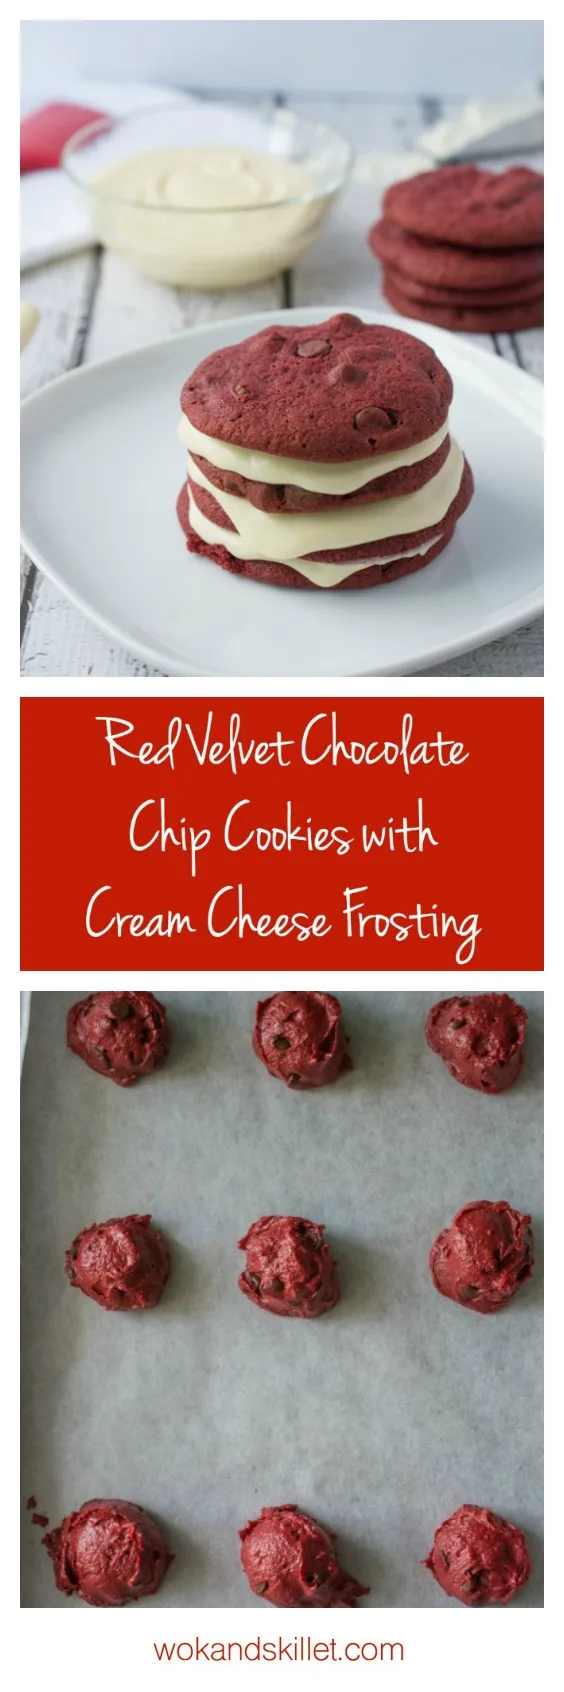 These Red Velvet Chocolate Chip Cookies are awesome enough on their own, but add the Cream Cheese Frosting and it takes the cookie to a whole new level of YUM!